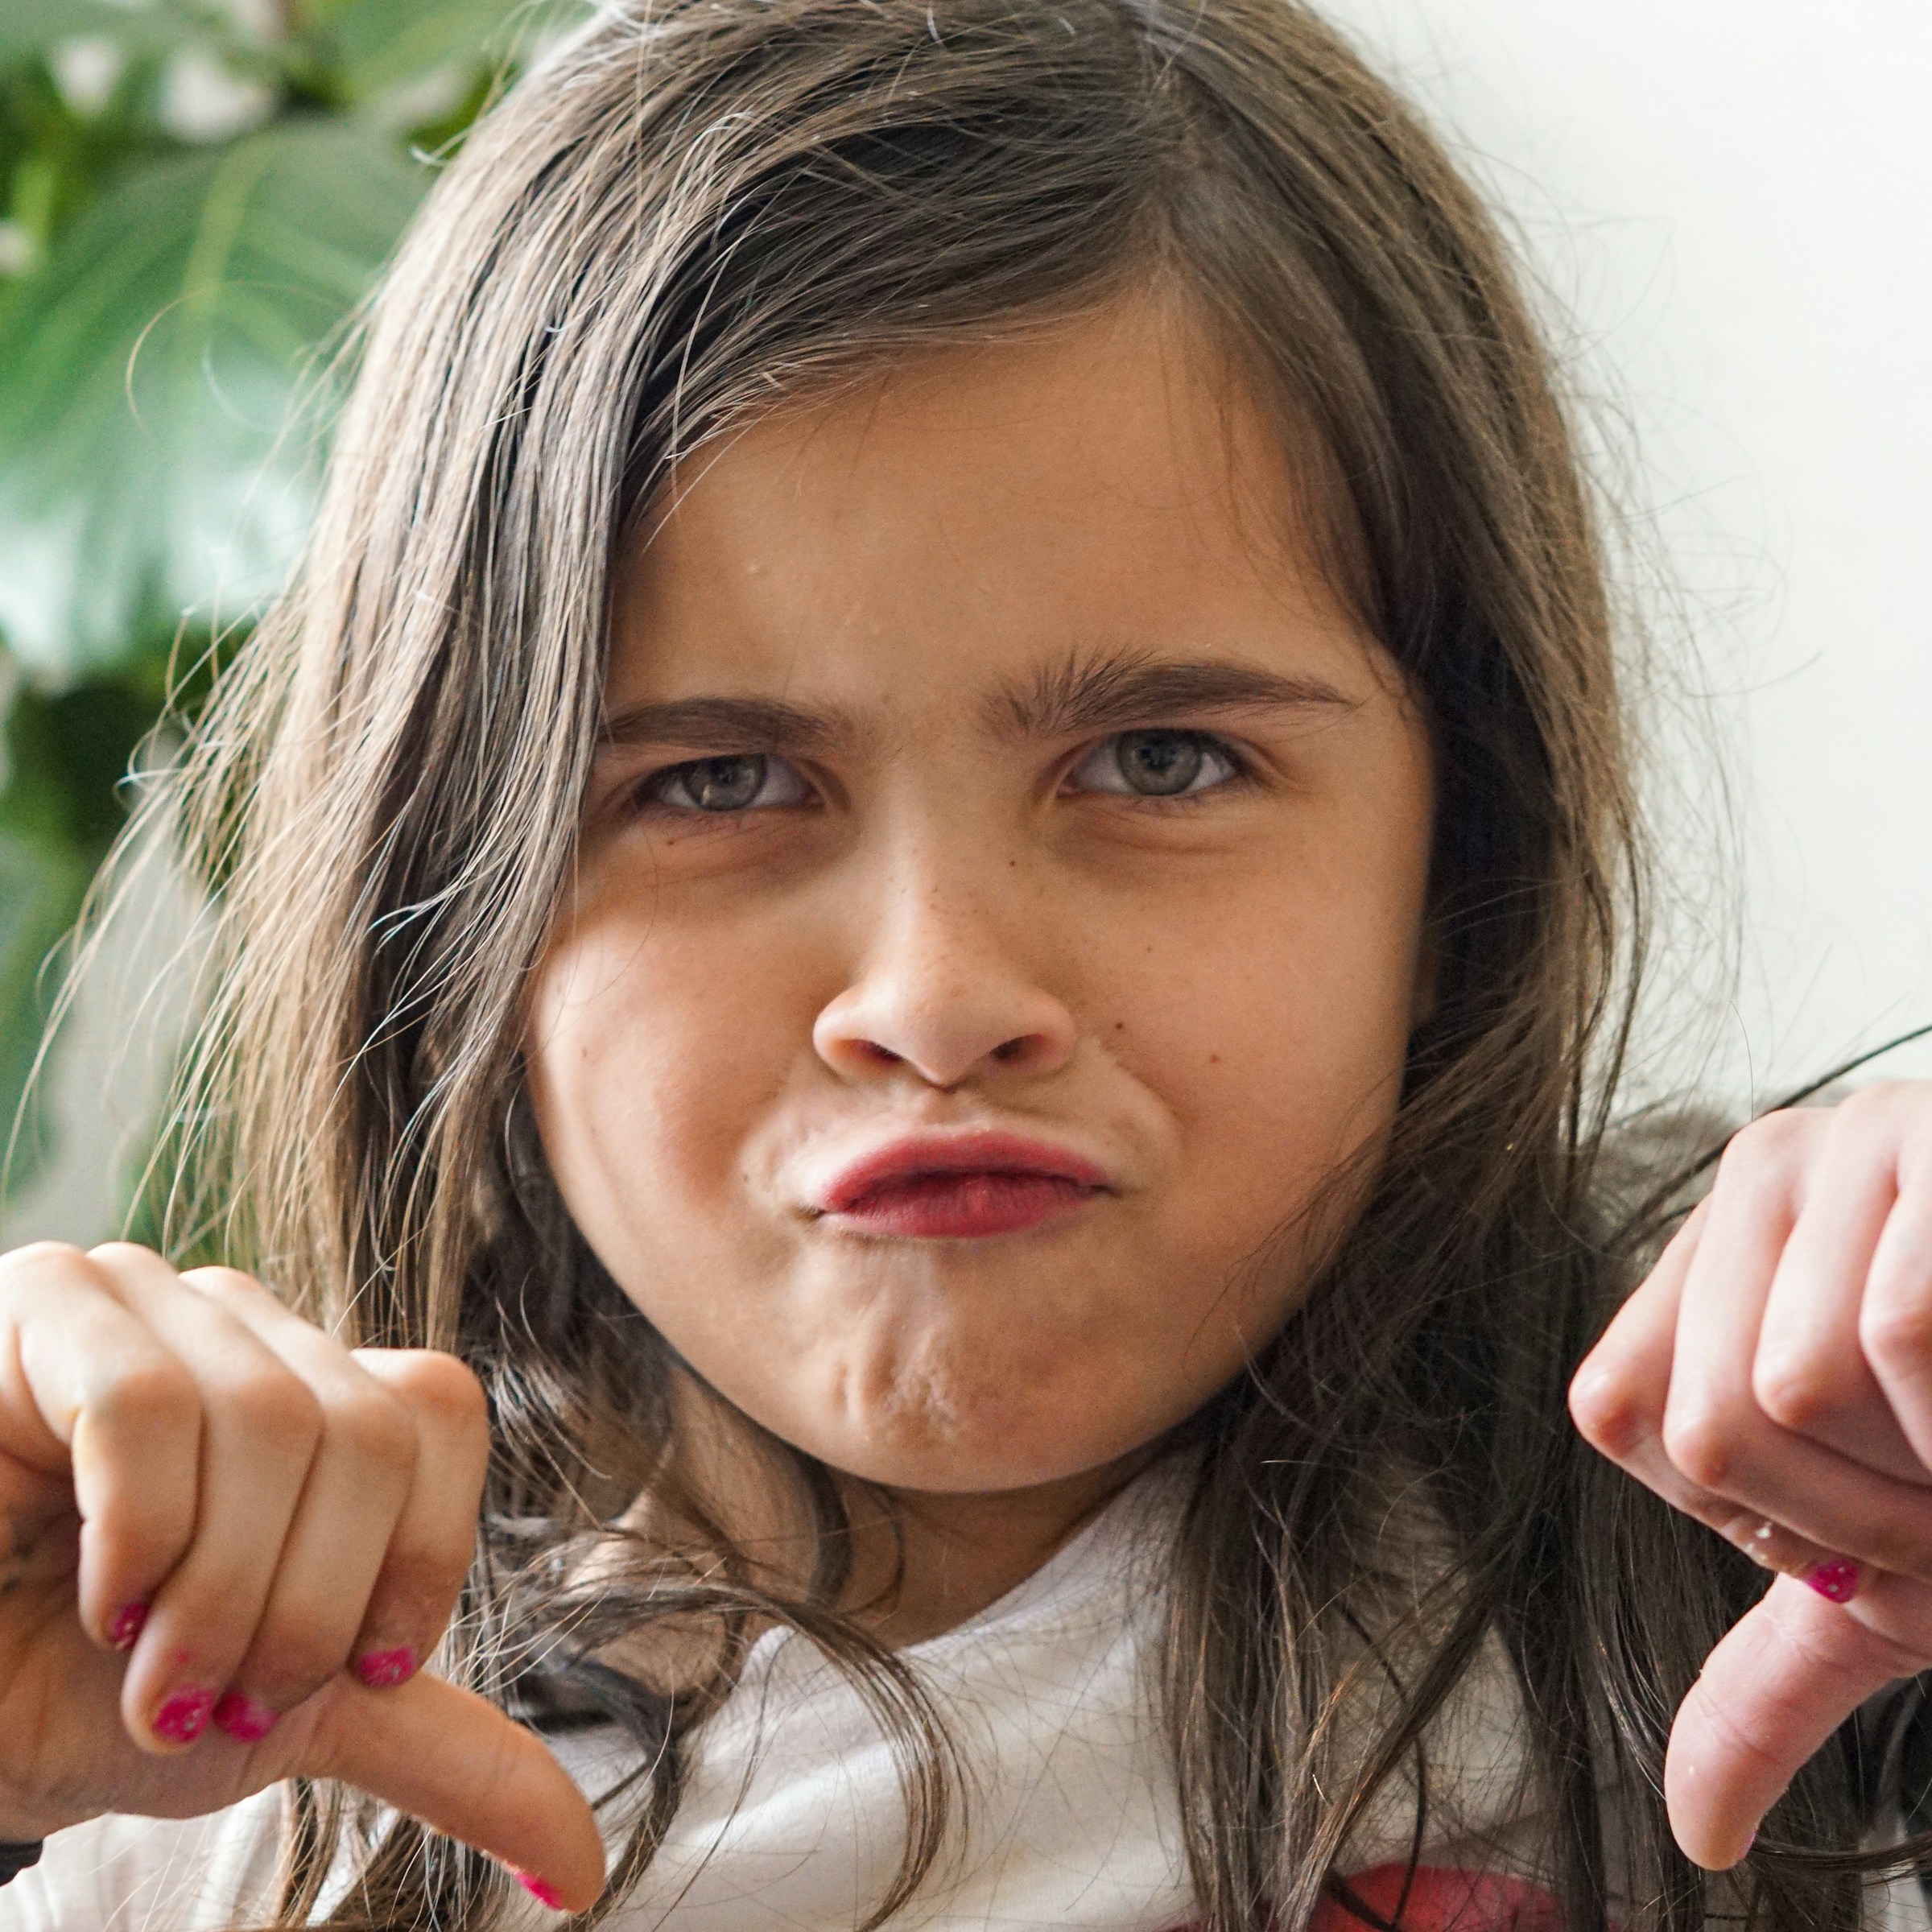 An upset child showing thumbs down | Source: Unsplash